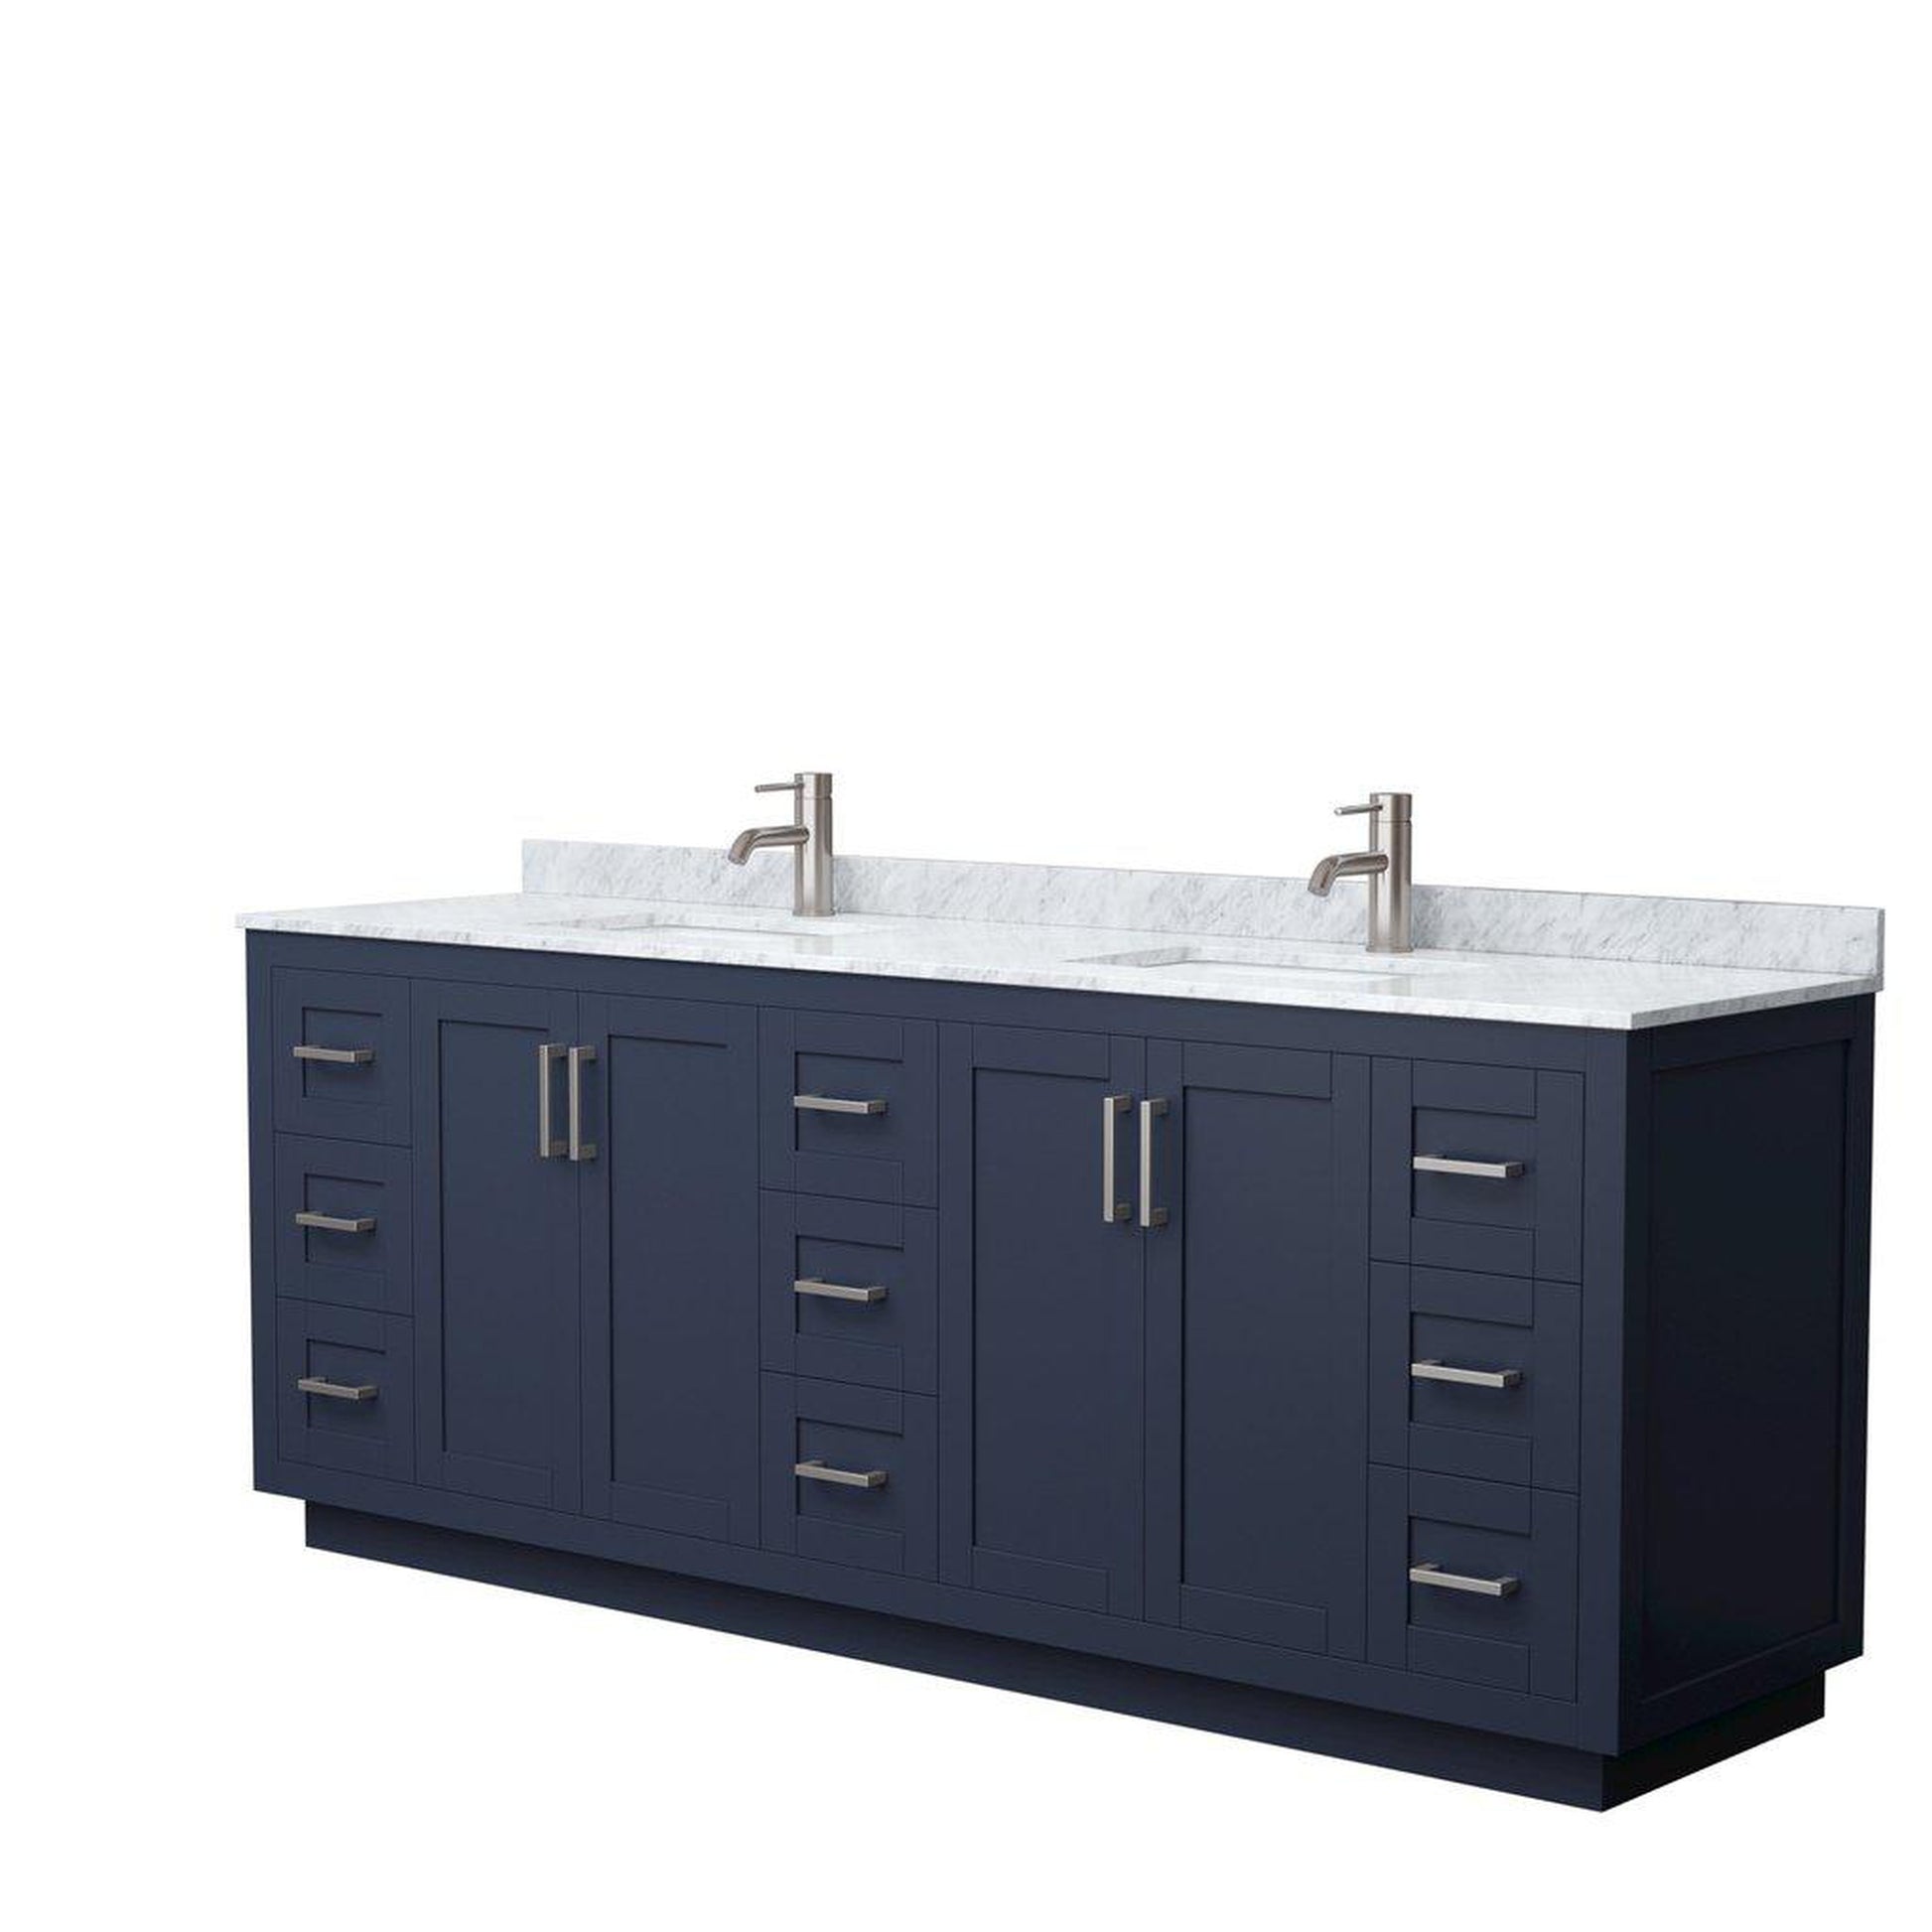 Wyndham Collection Miranda 84" Double Bathroom Dark Blue Vanity Set With White Carrara Marble Countertop, Undermount Square Sink, And Brushed Nickel Trim